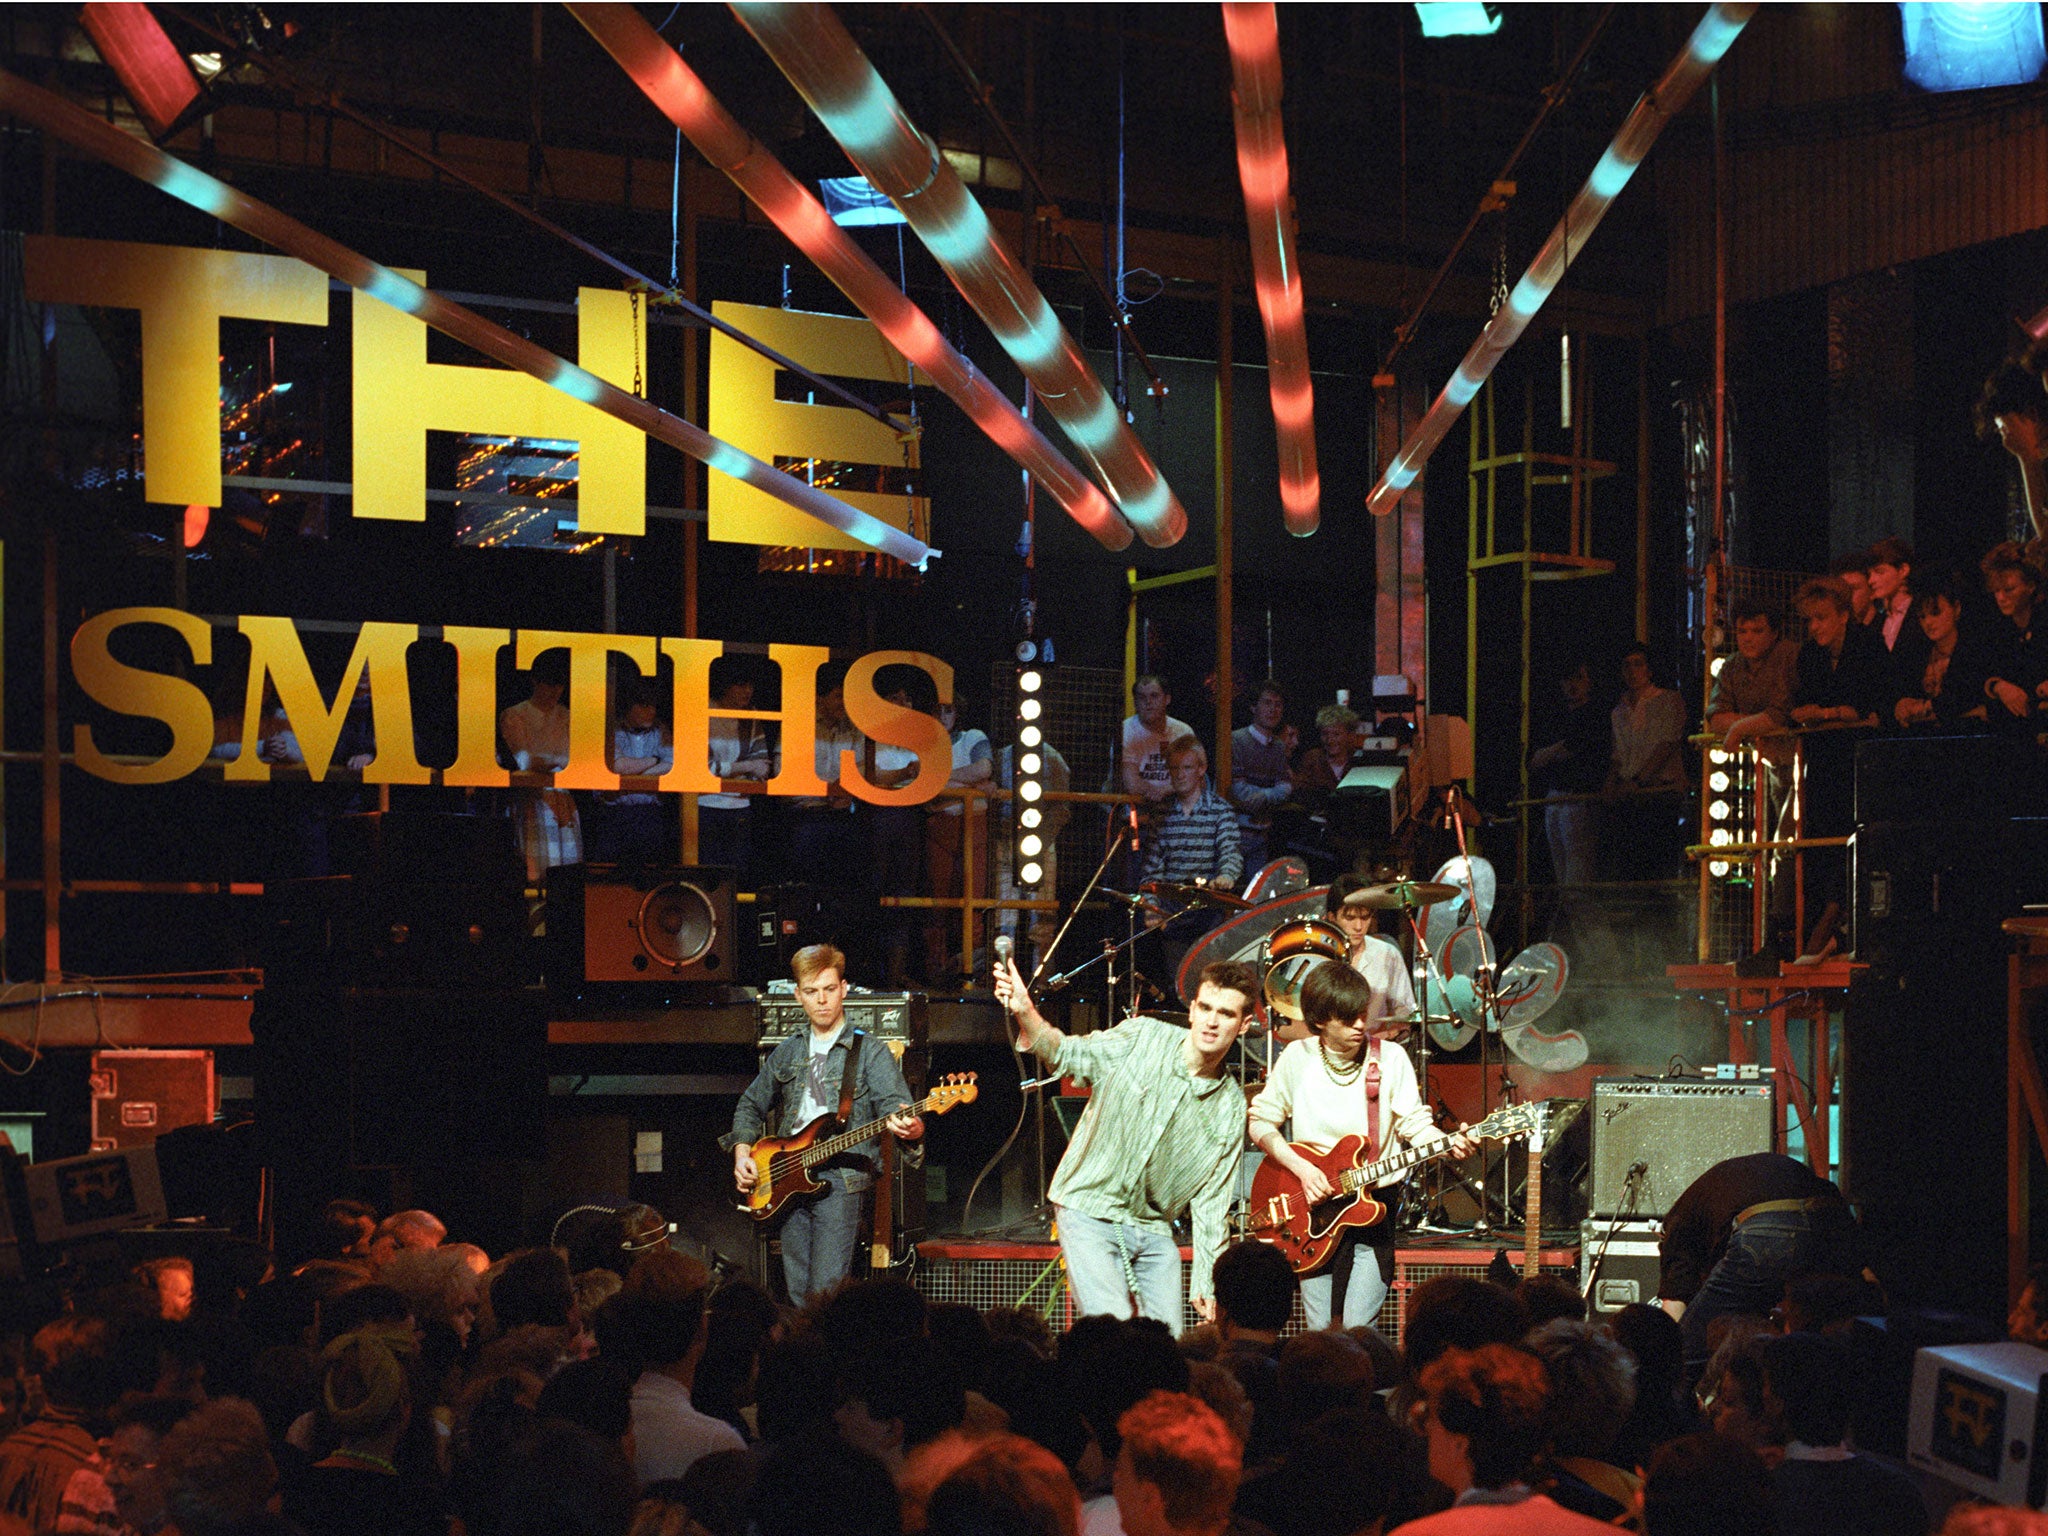 The Smiths: a reunion is unlikely